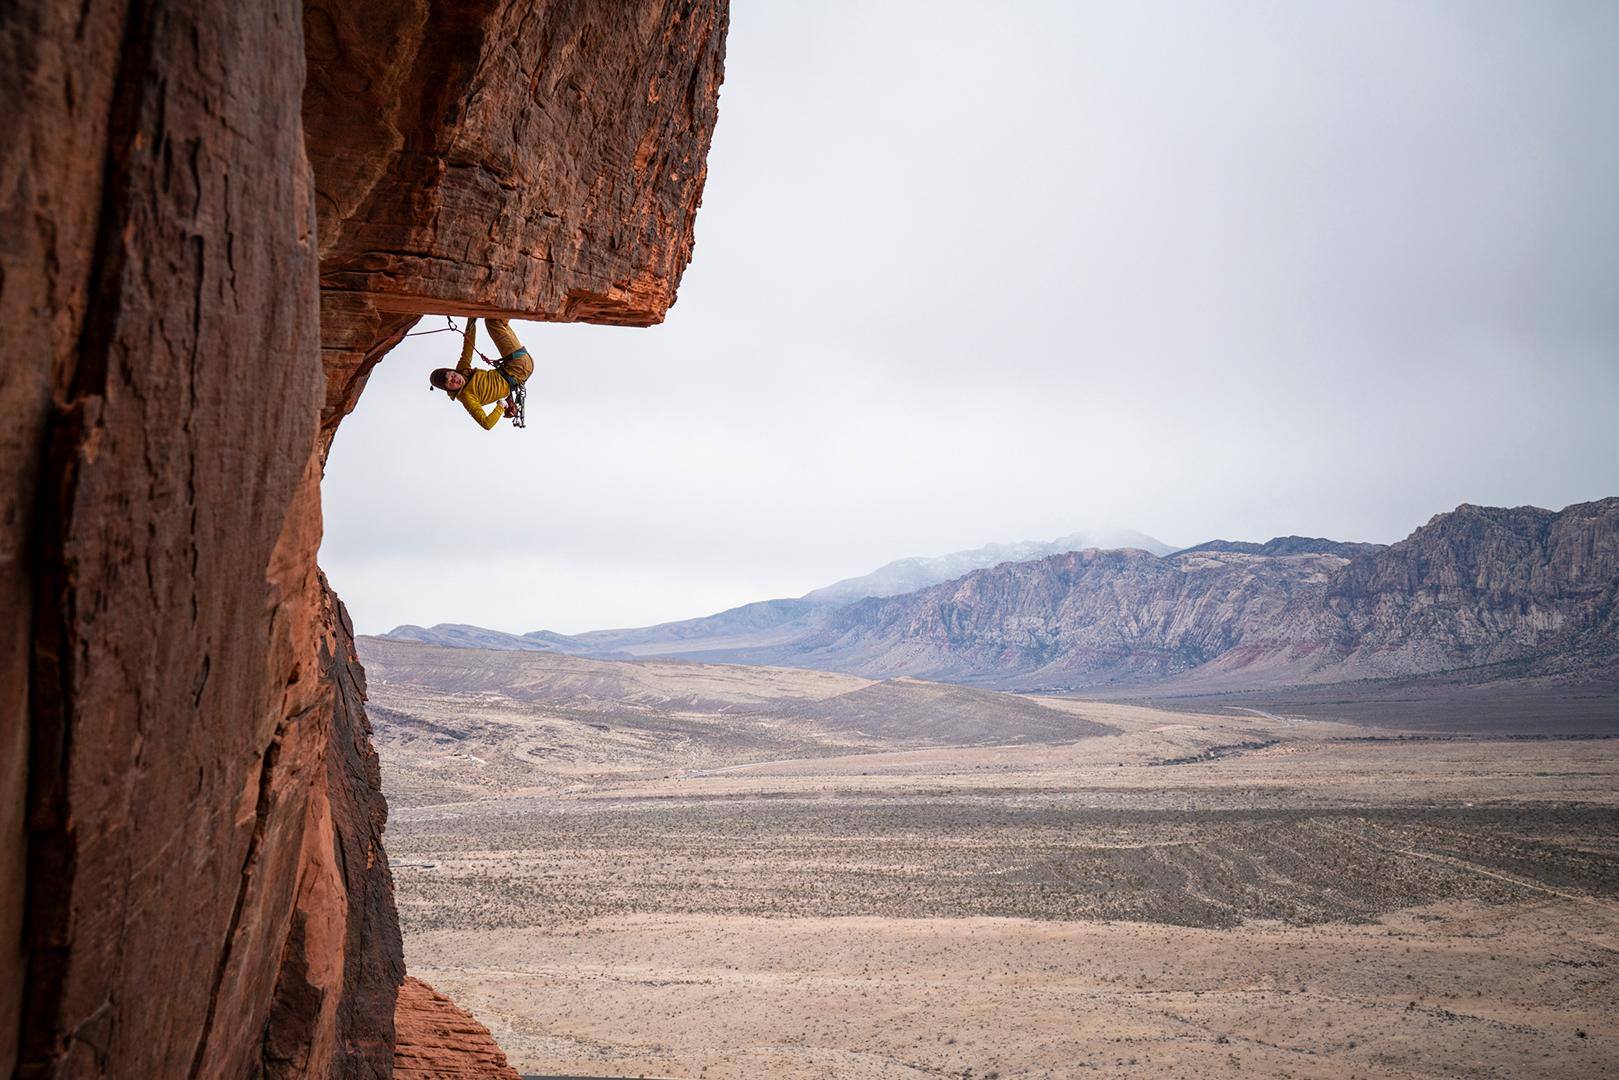 Kick-through master Laur Sabourin on The Great Red Roof. Red Rocks, NV. 